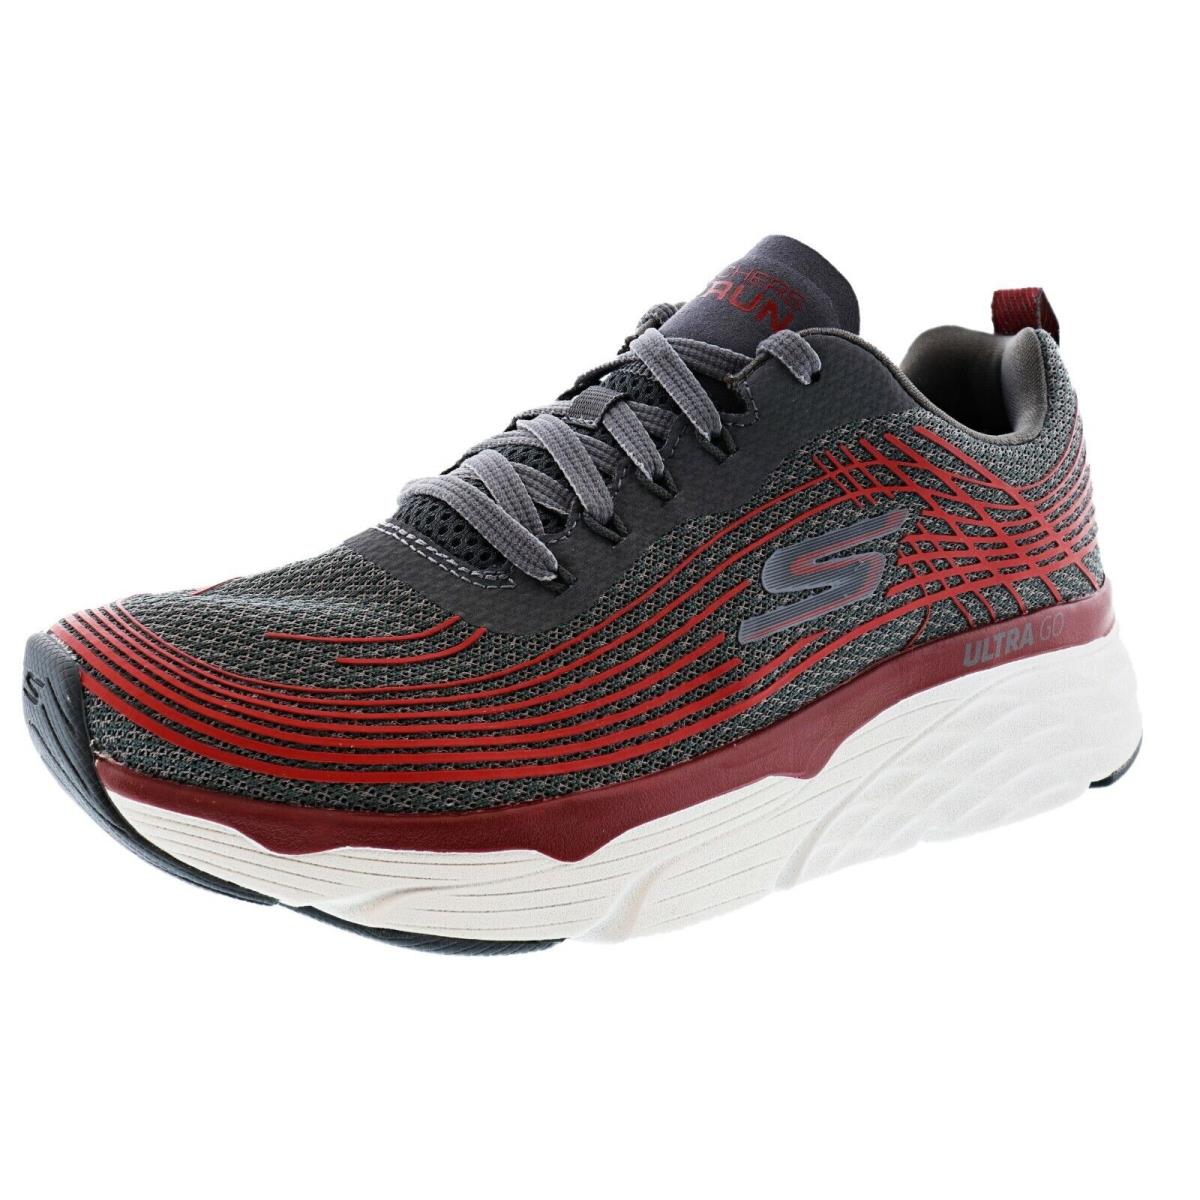 Skechers Men`s Max Cushioning Elite 54430CCRD Lace-up Running Shoes